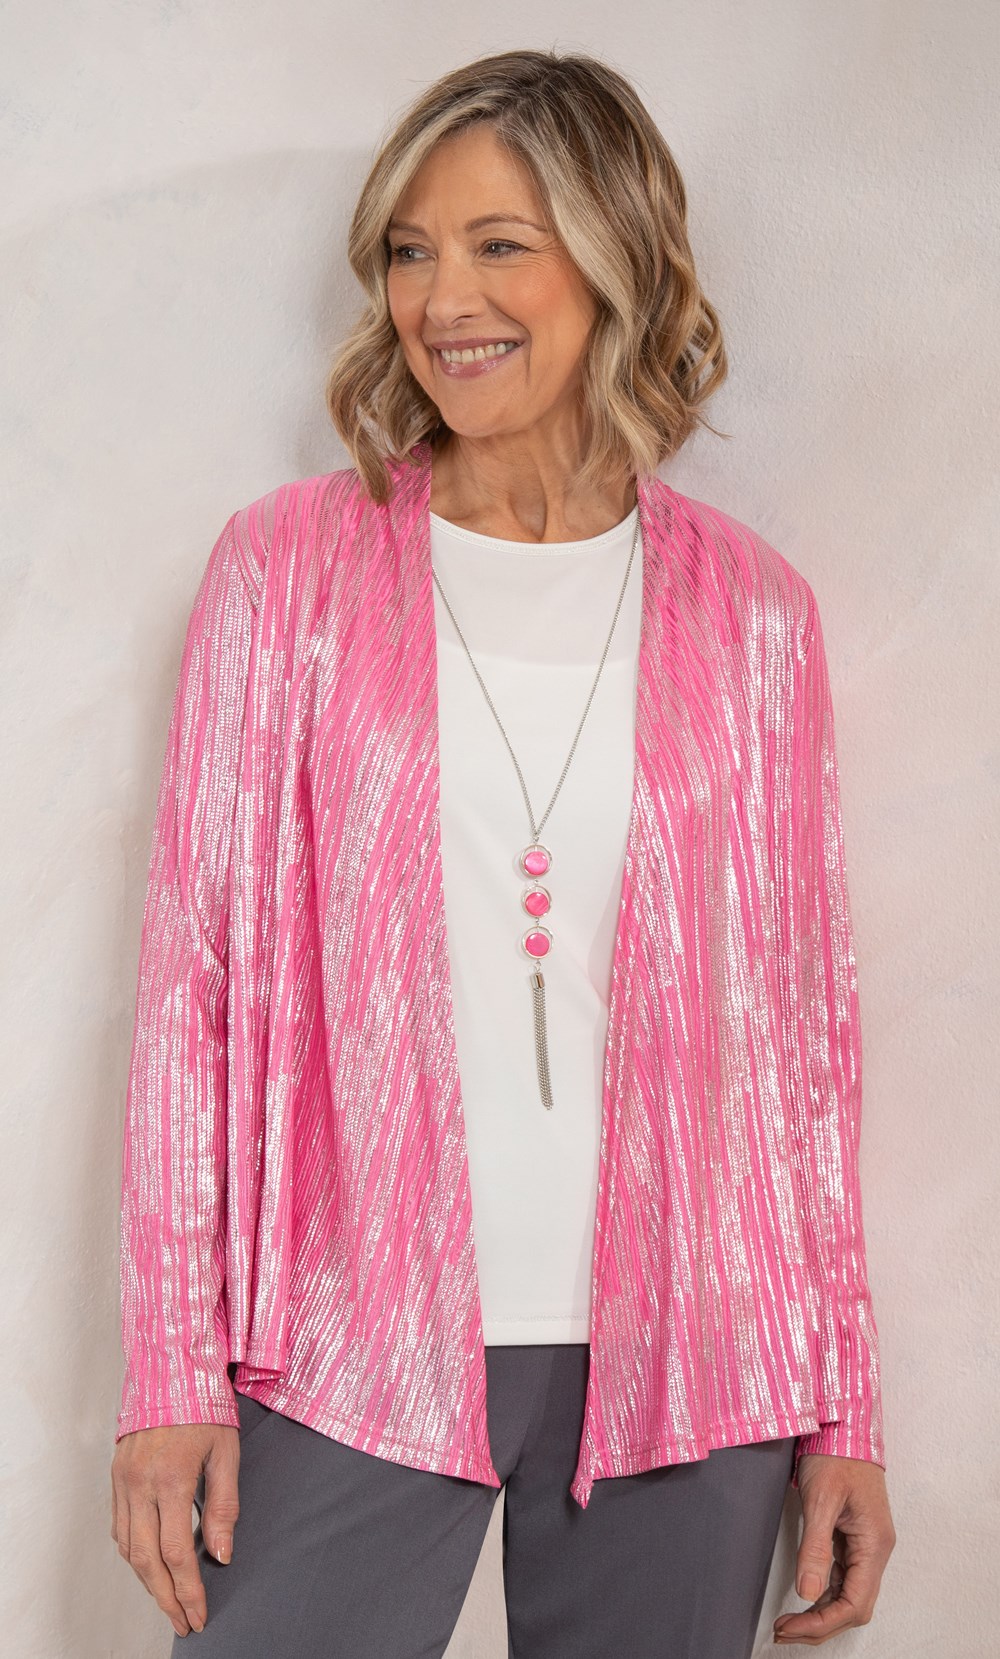 Anna Rose Top And Shimmer Cover Up With Necklace